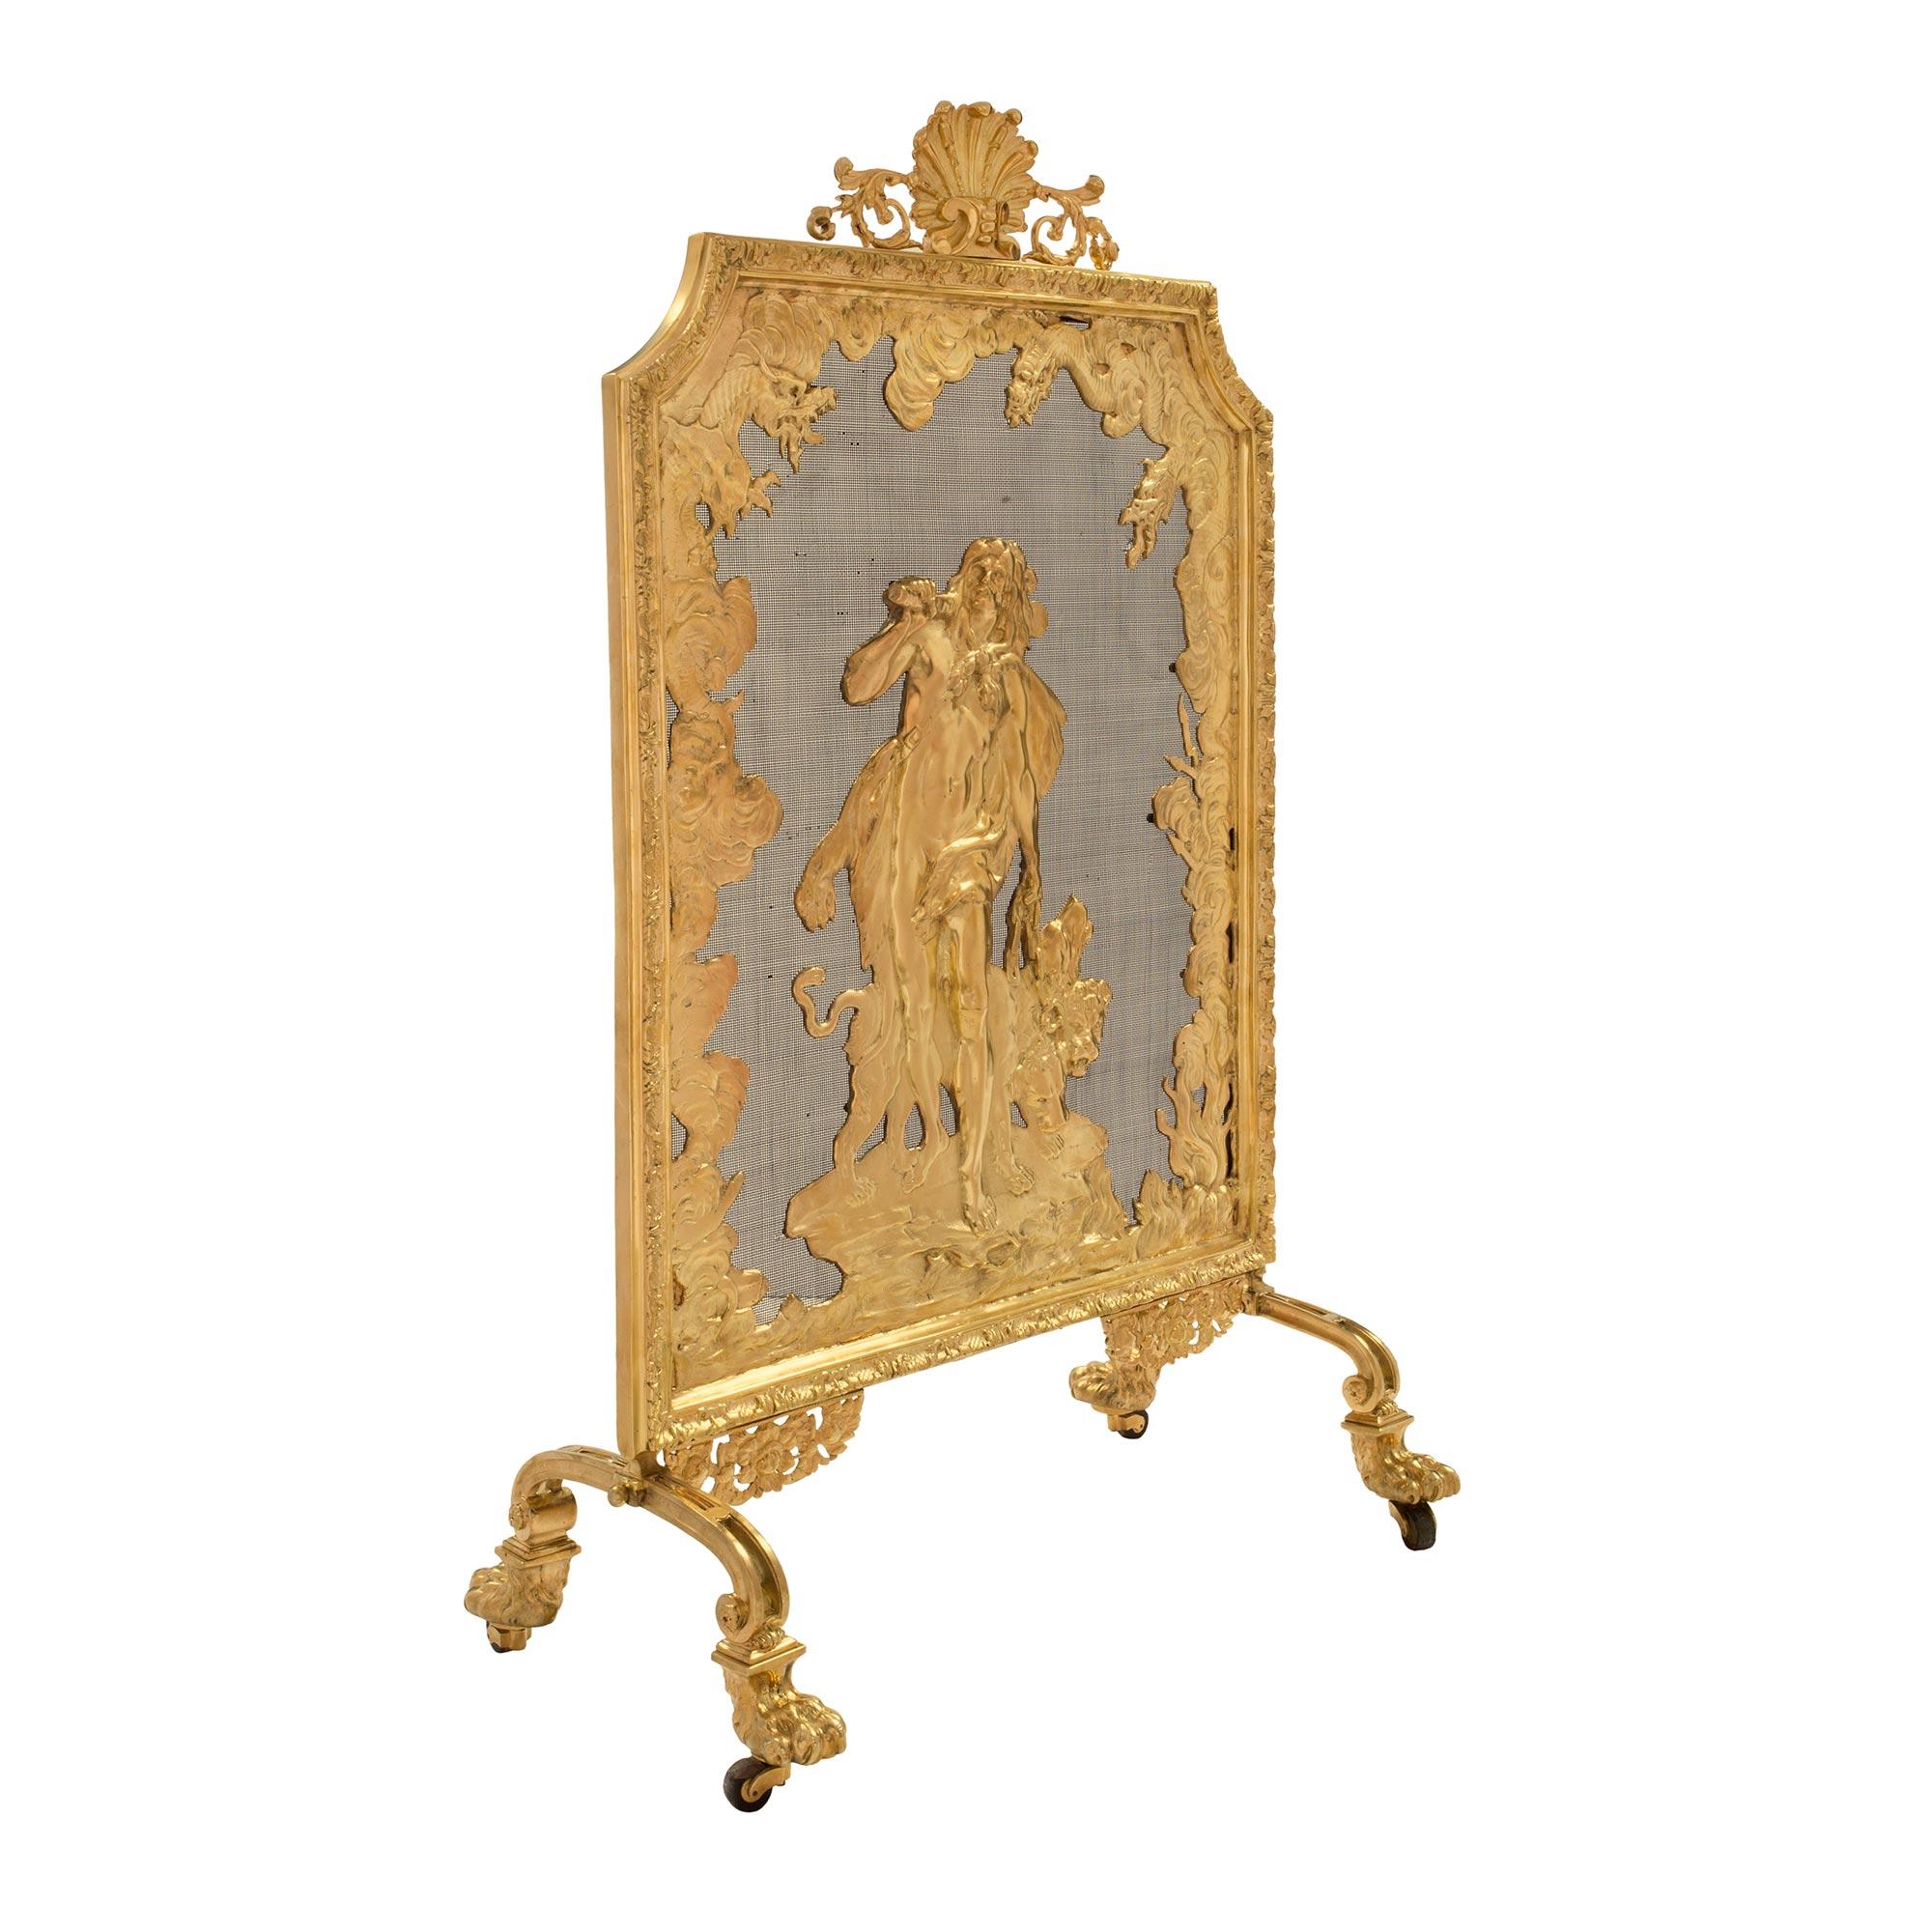 An elegant French 19th century Louis XVI st. ormolu fireguard. The fireguard is raised by its original casters under handsome paw feet and scrolled legs. Above are beautiful pierced foliate scrolled movements centering the impressive and finely